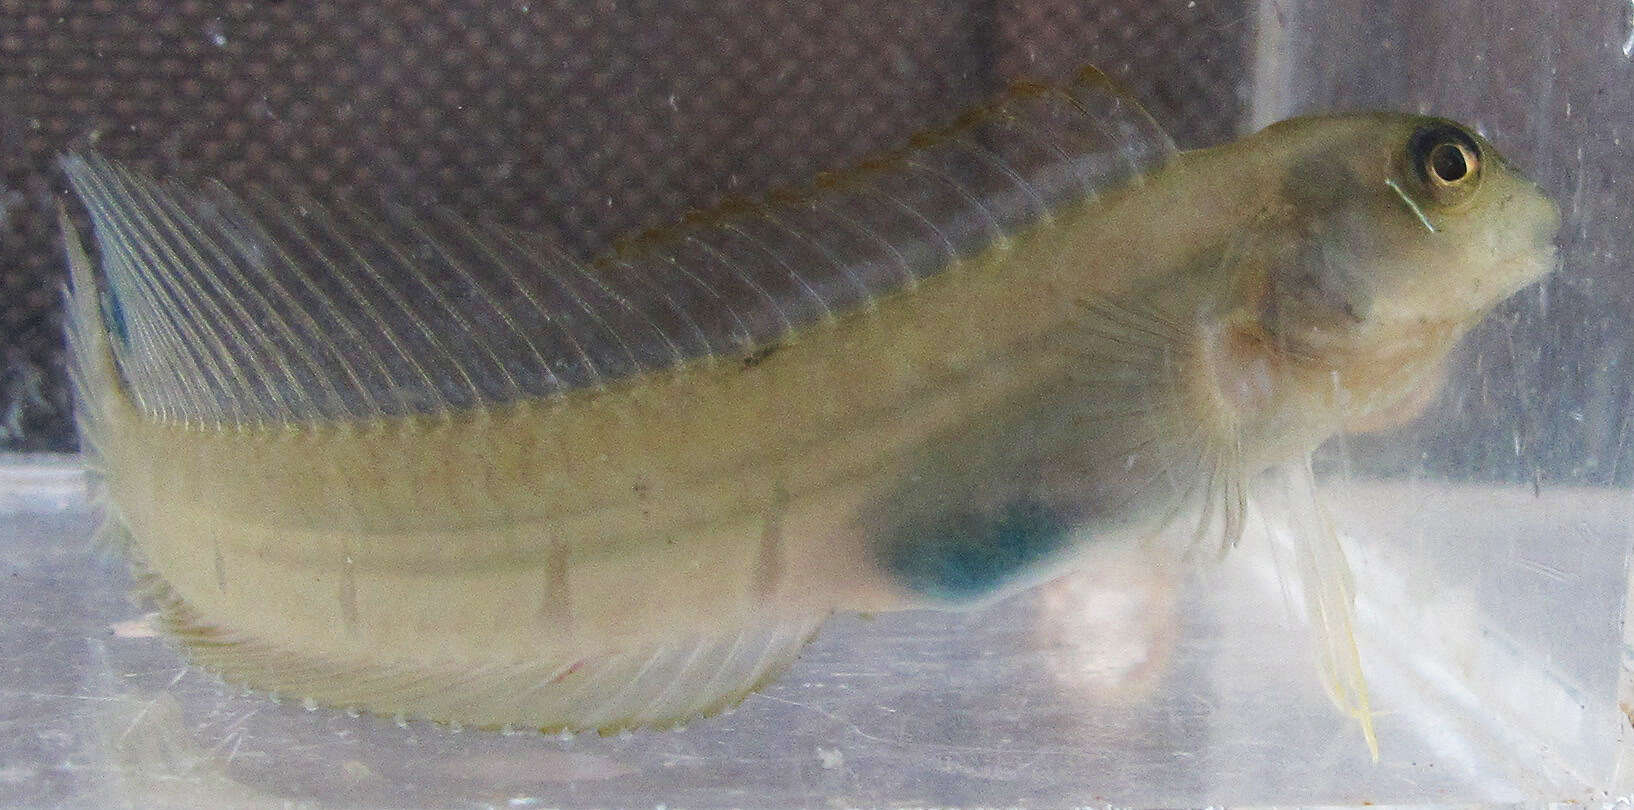 Image of Fang-toothed blenny